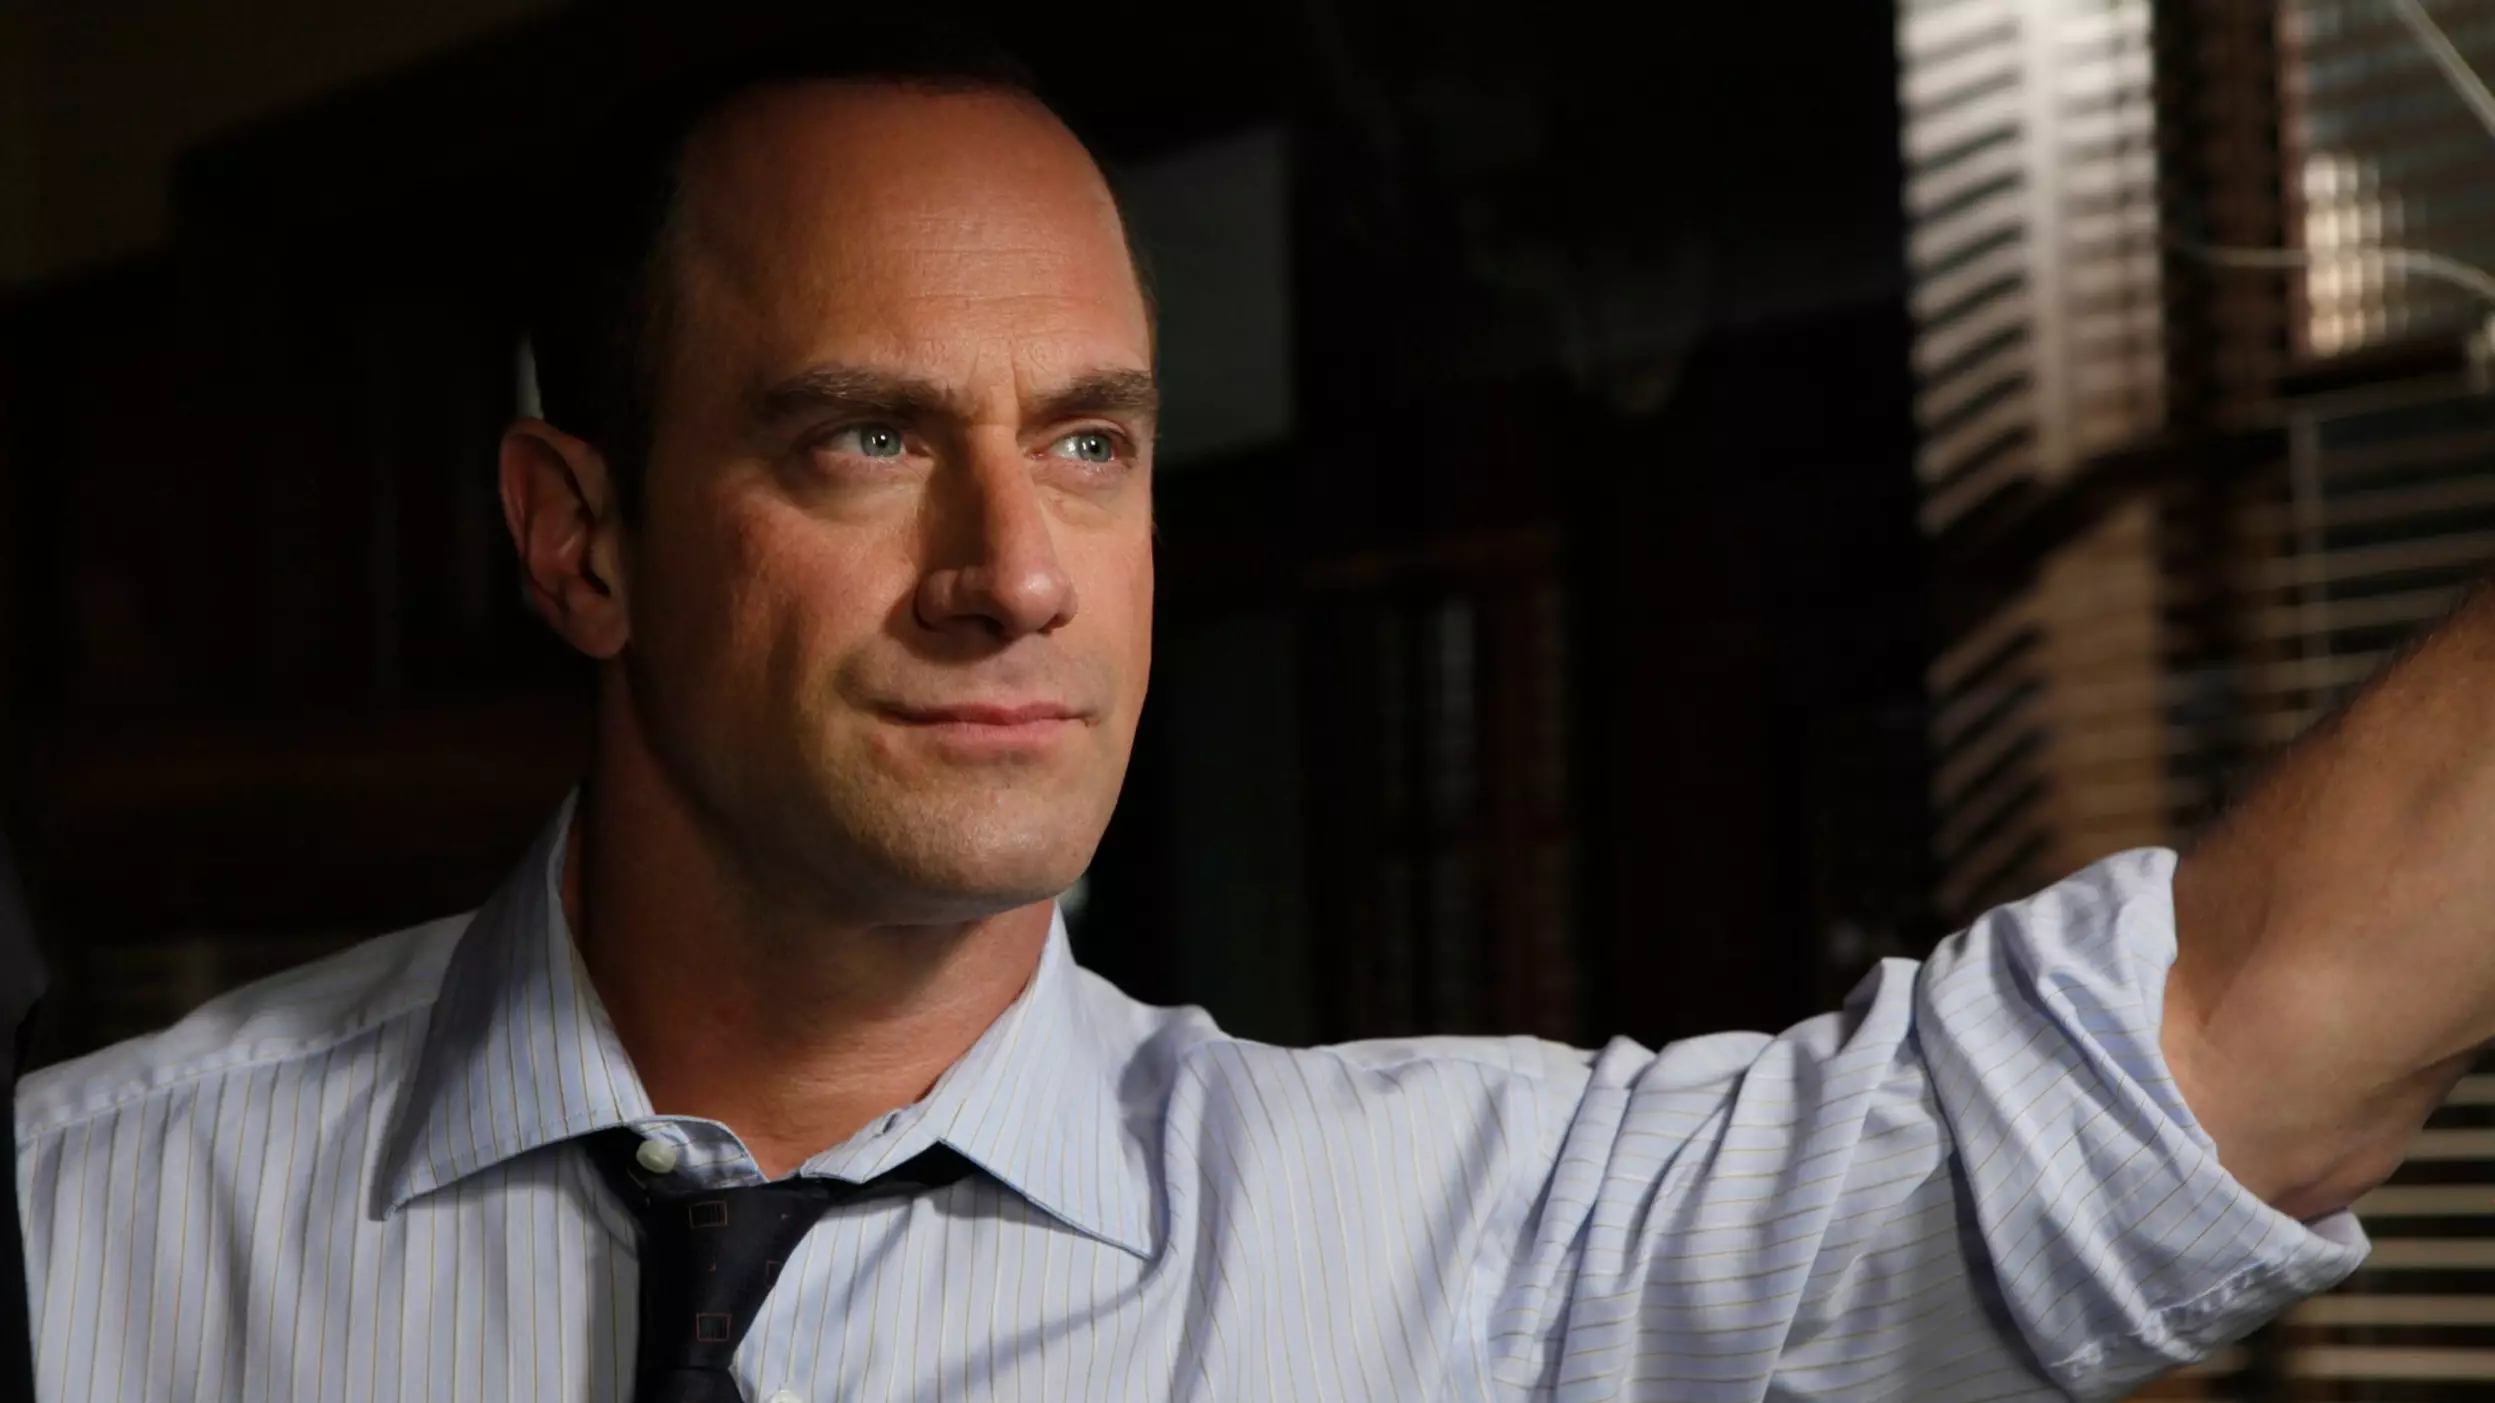 New Law & Order Series With Detective Elliot Stabler Will Premiere In Autumn Schedule